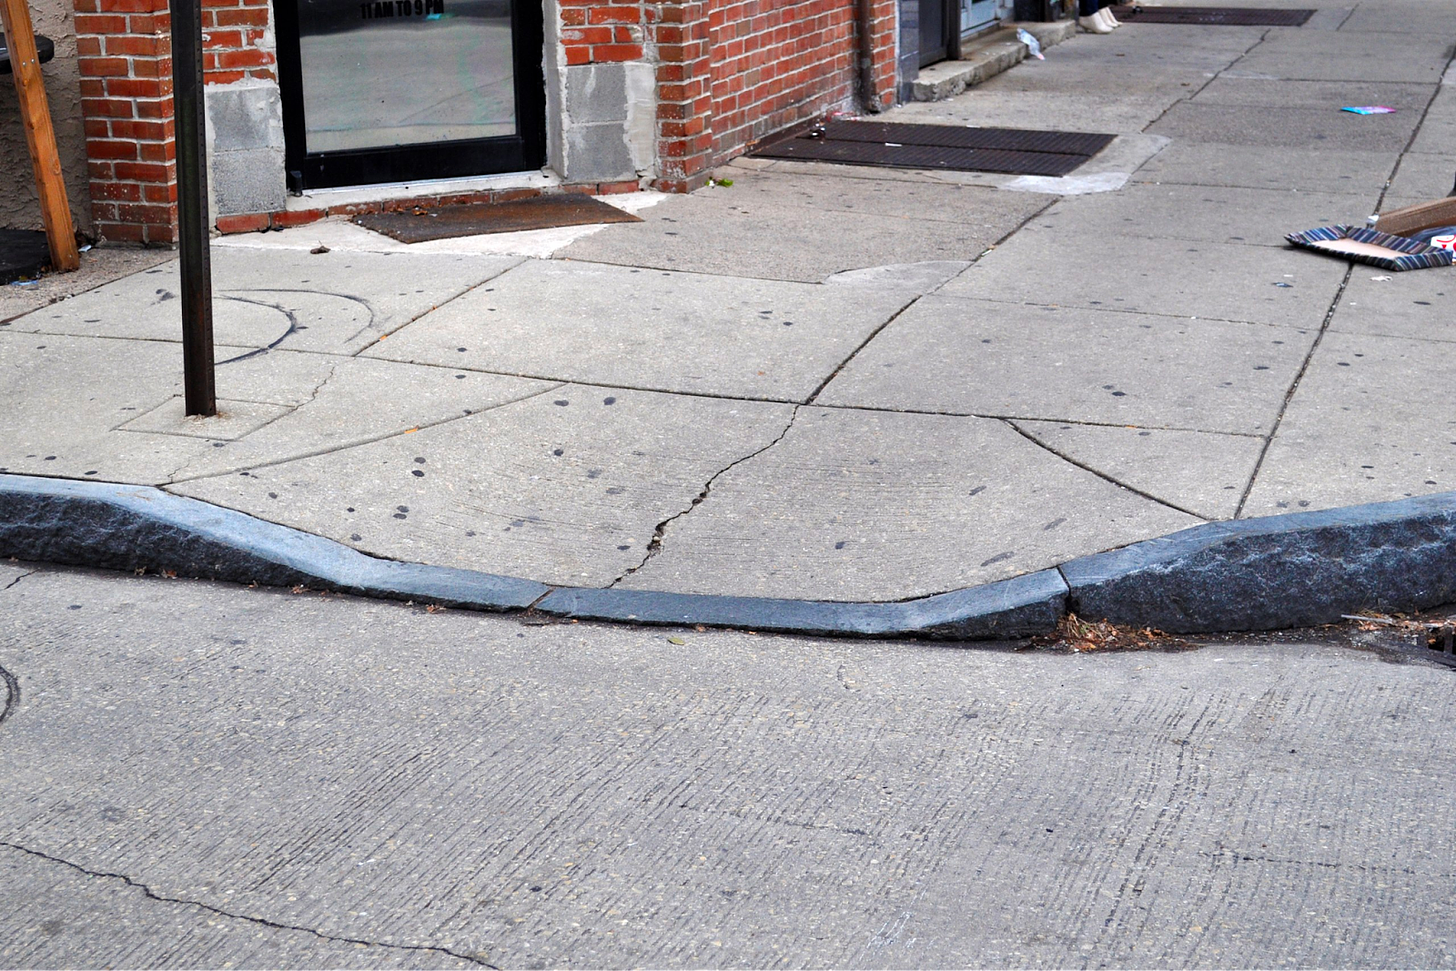 An image of a cut in the curb to allow access to people using mobility devices like wheelchairs and strollers.